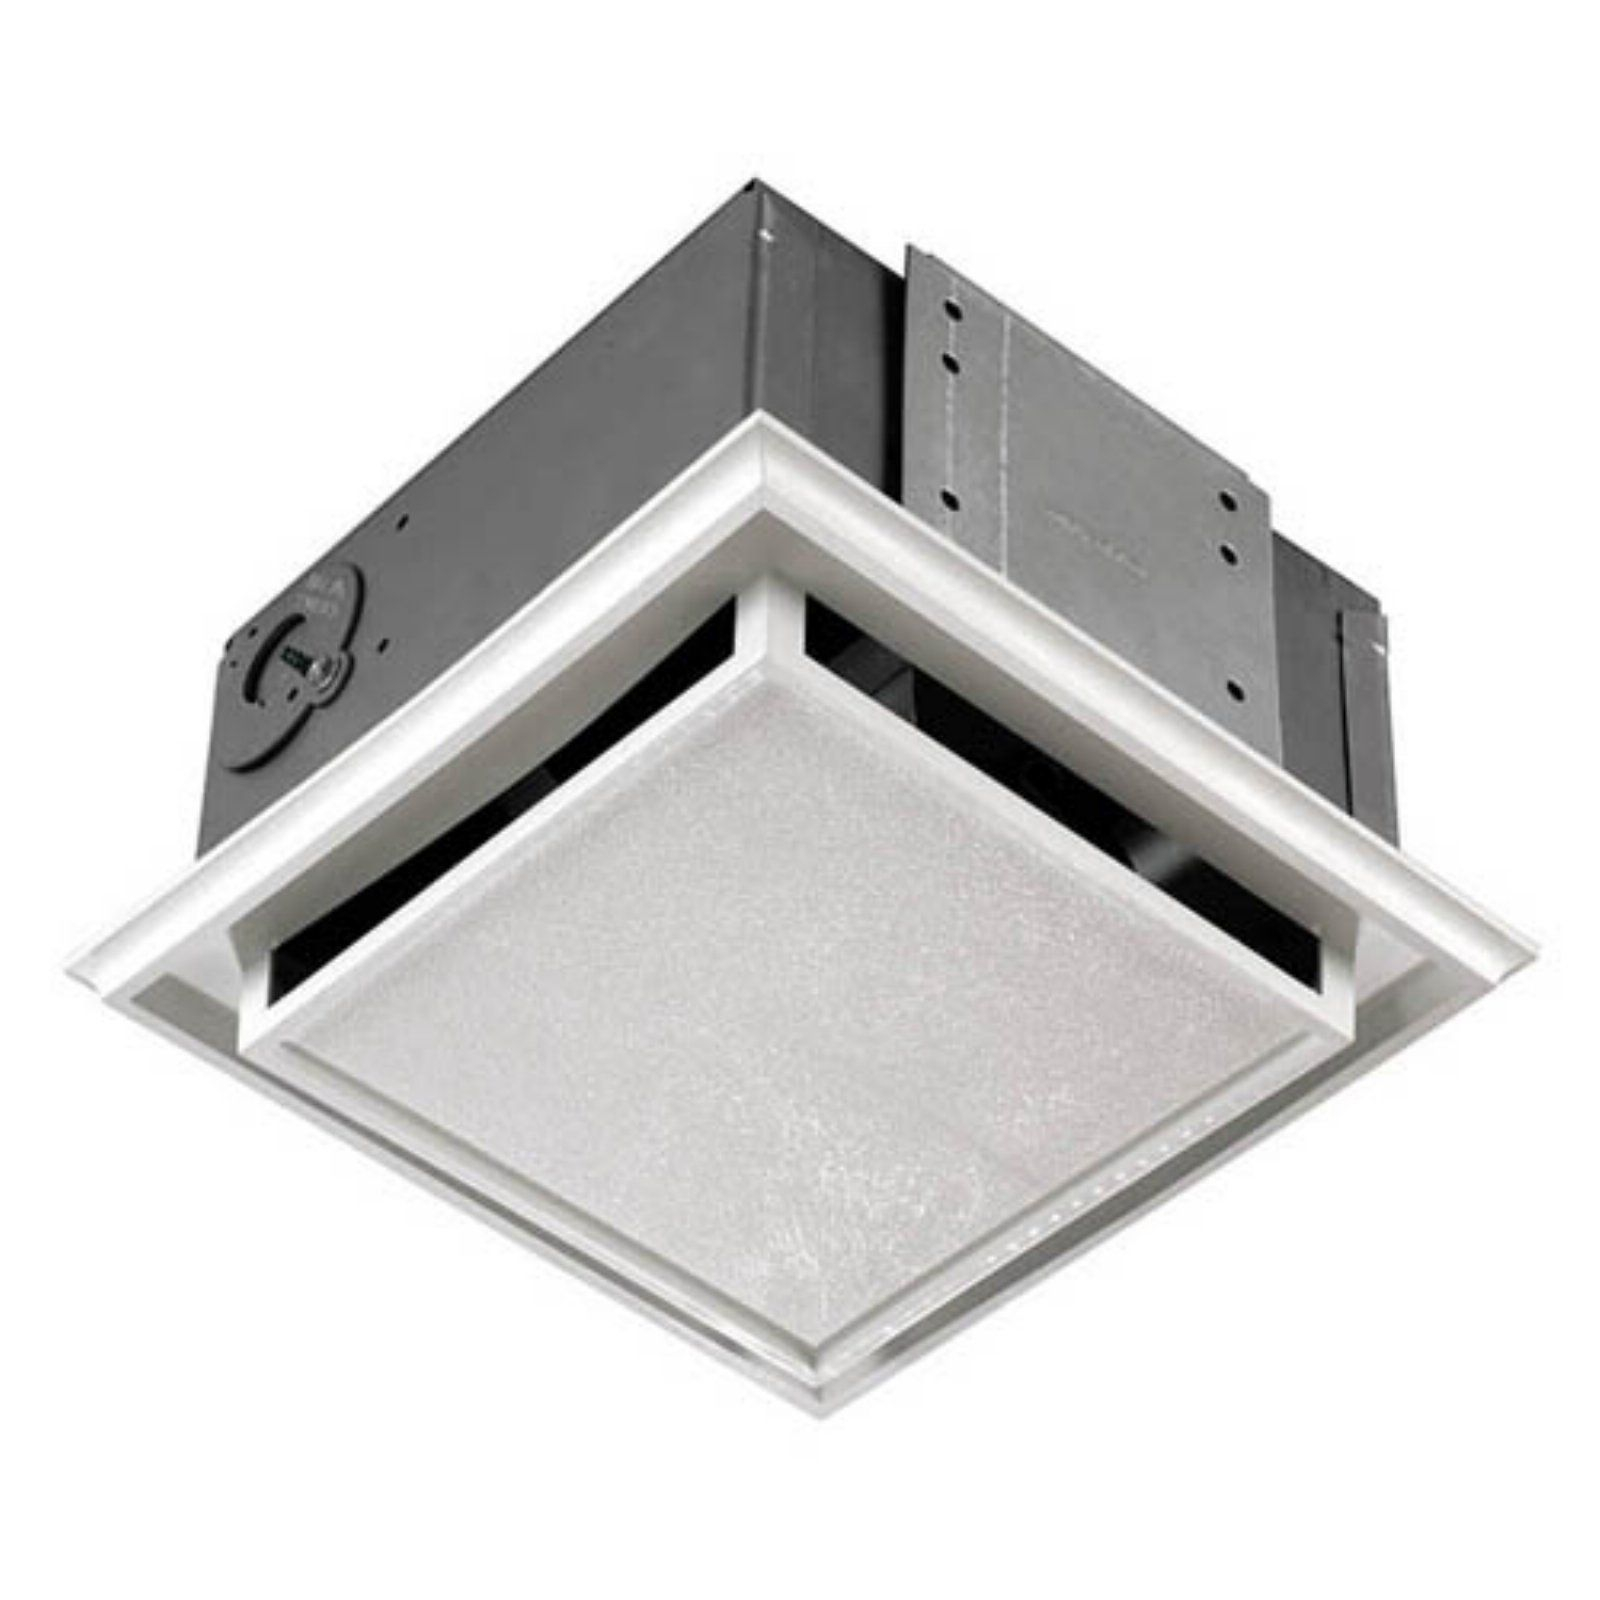 Broan Nutone 682nt Duct Free Bathroom Ventilation Fan within proportions 1600 X 1600